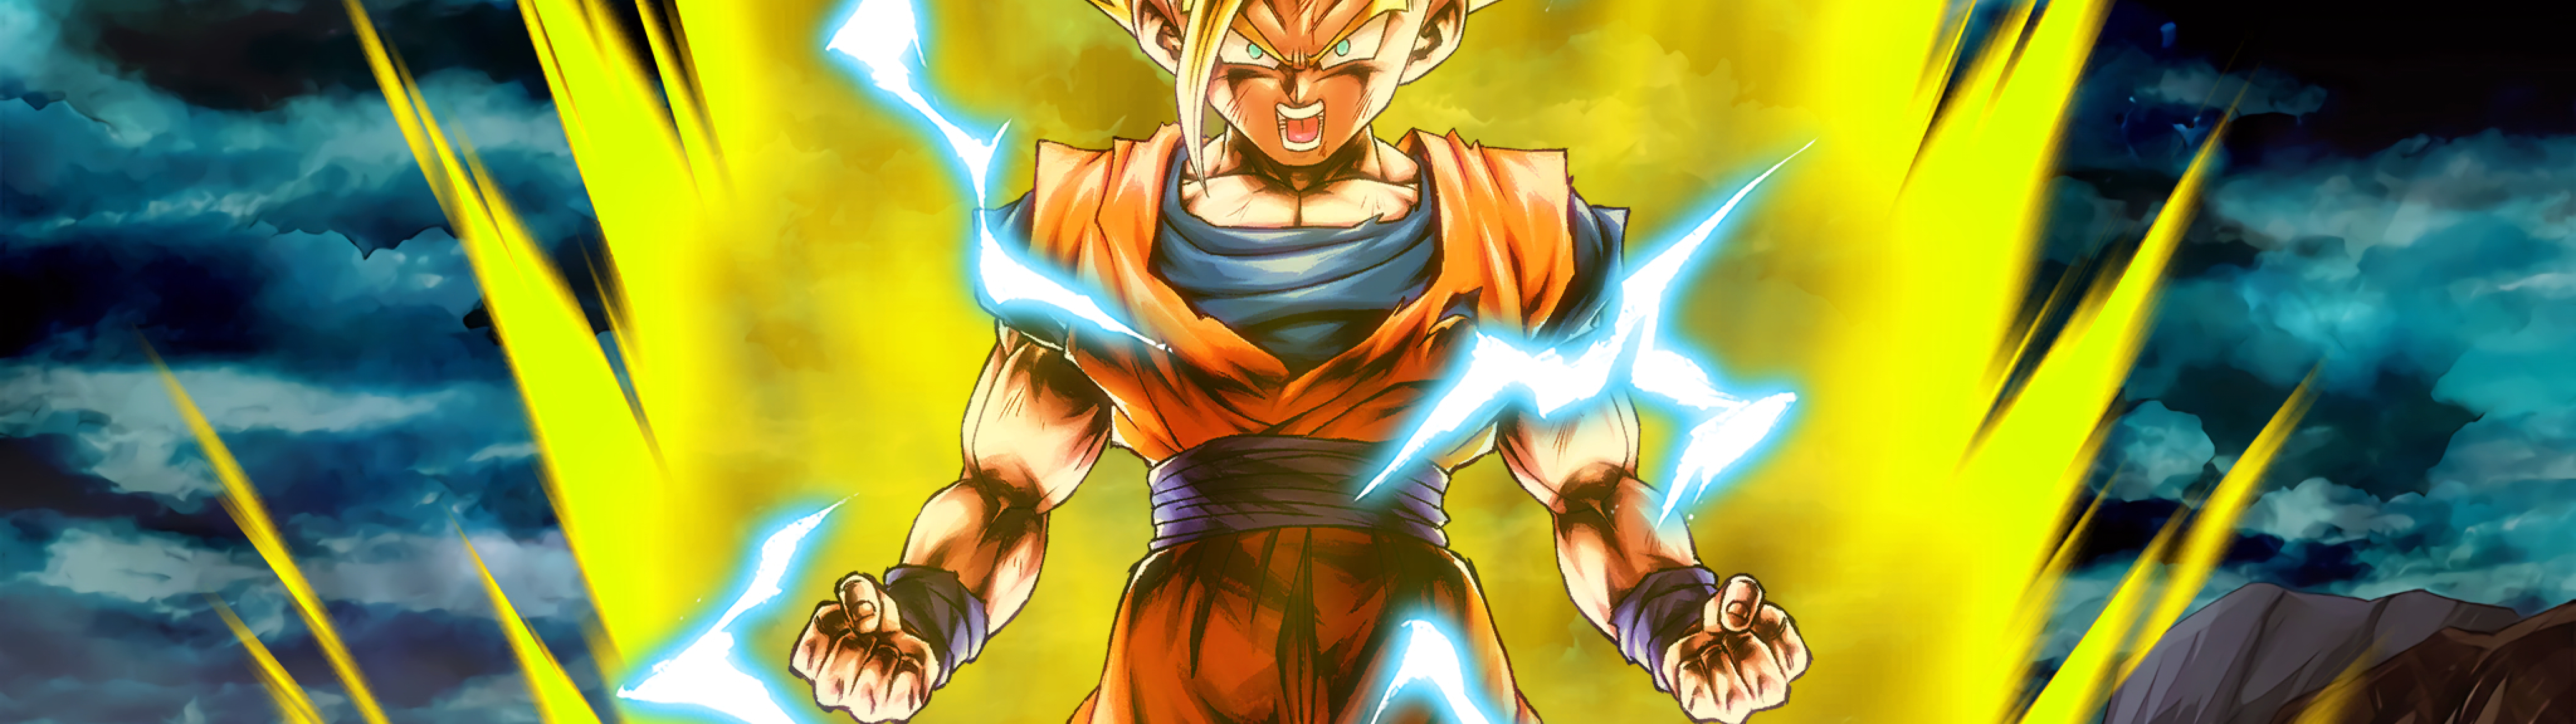 5120x1440 Super Saiyan 2 Gohan Cool HDDragon Ball Z 5120x1440 Resolution  Wallpaper, HD Anime 4K Wallpapers, Images, Photos and Background -  Wallpapers Den